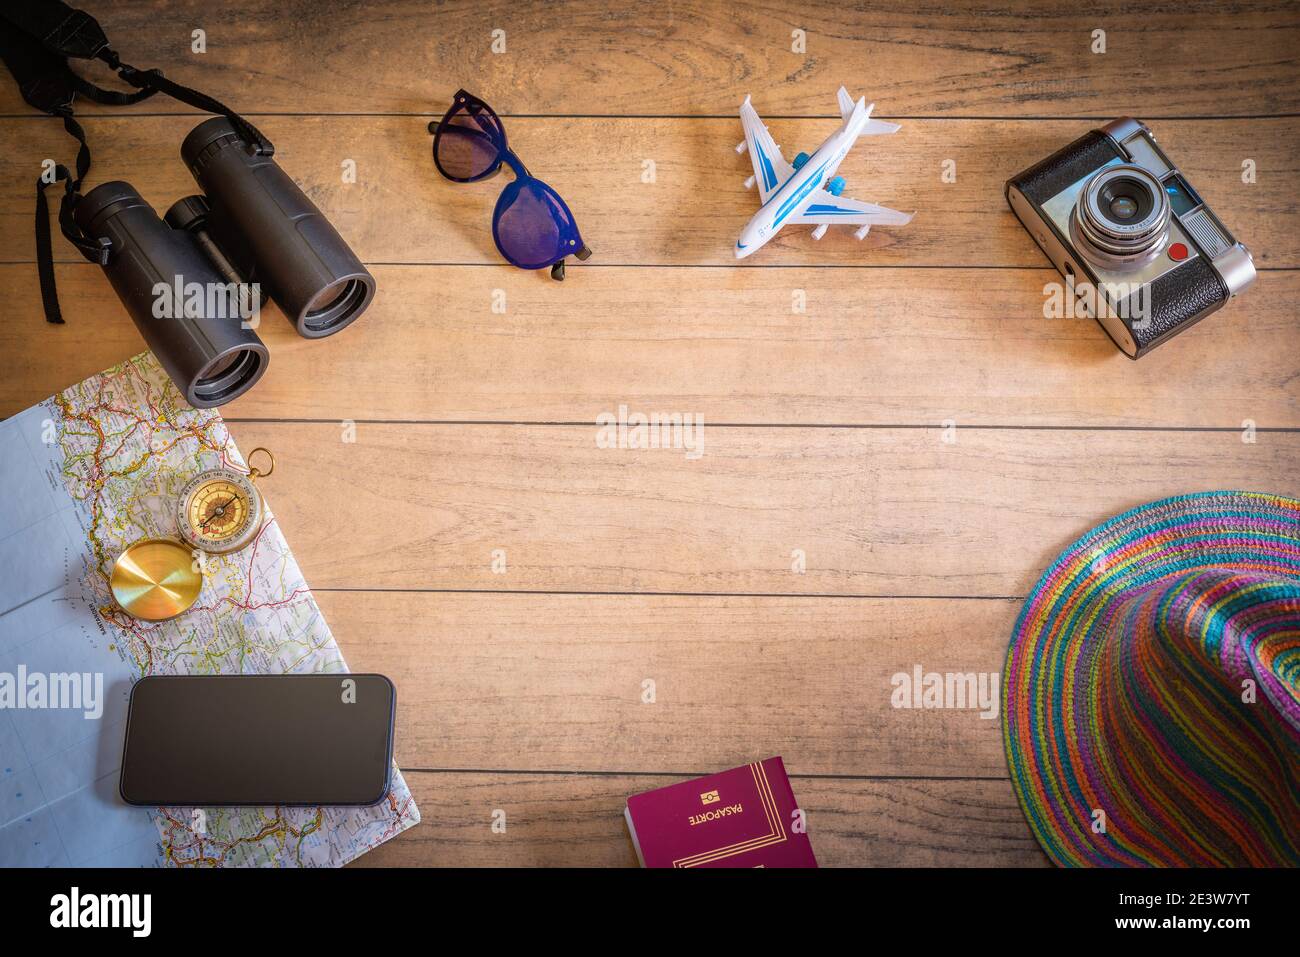 On a wood there are several important items to organize a trip that we can not forget. Stock Photo